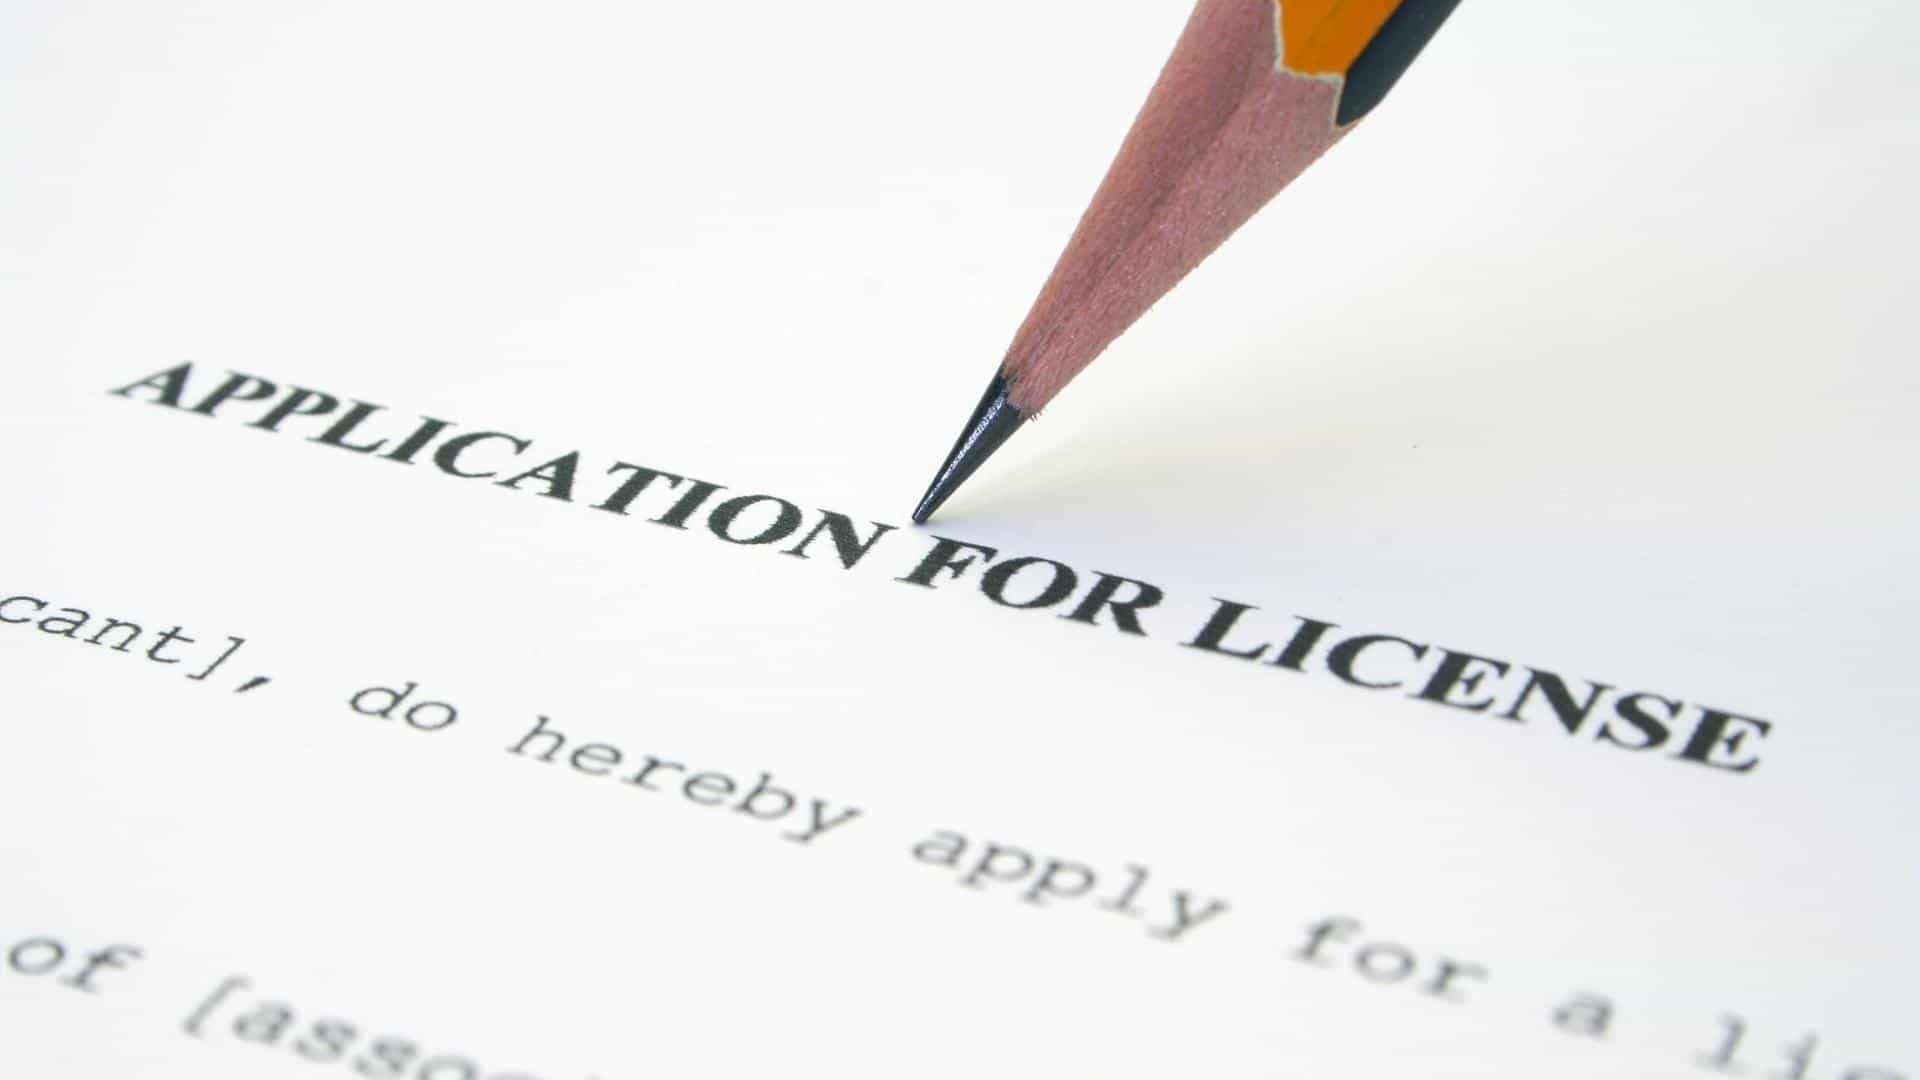 Permit Applications and License Renewals